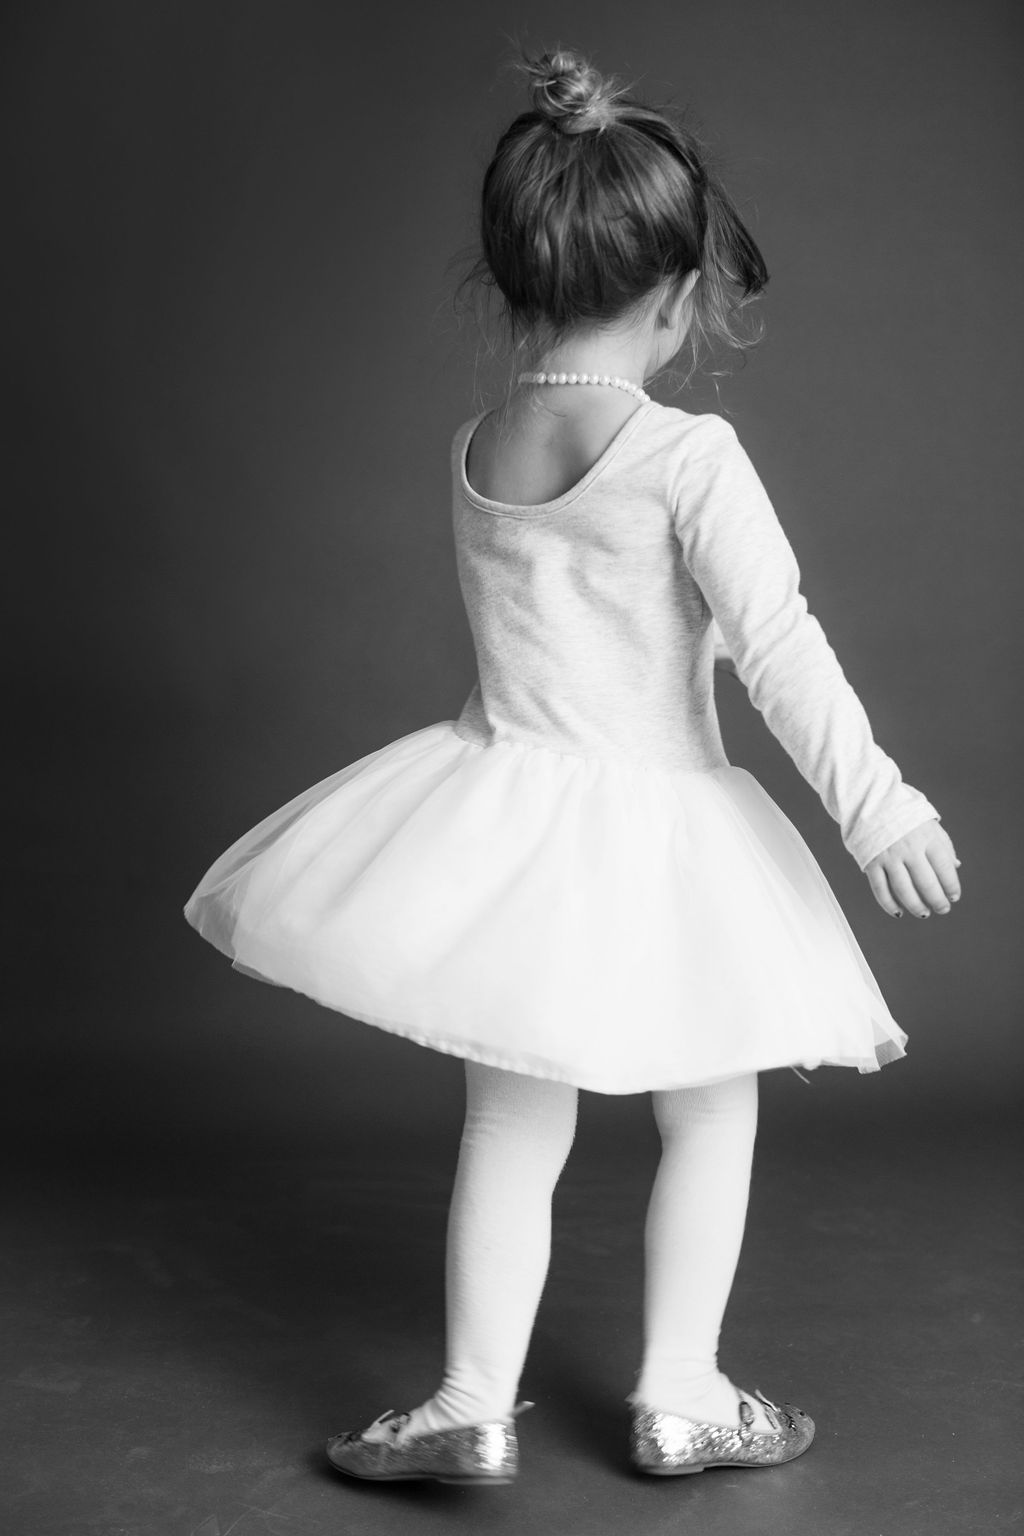 young dancer spinning in dress